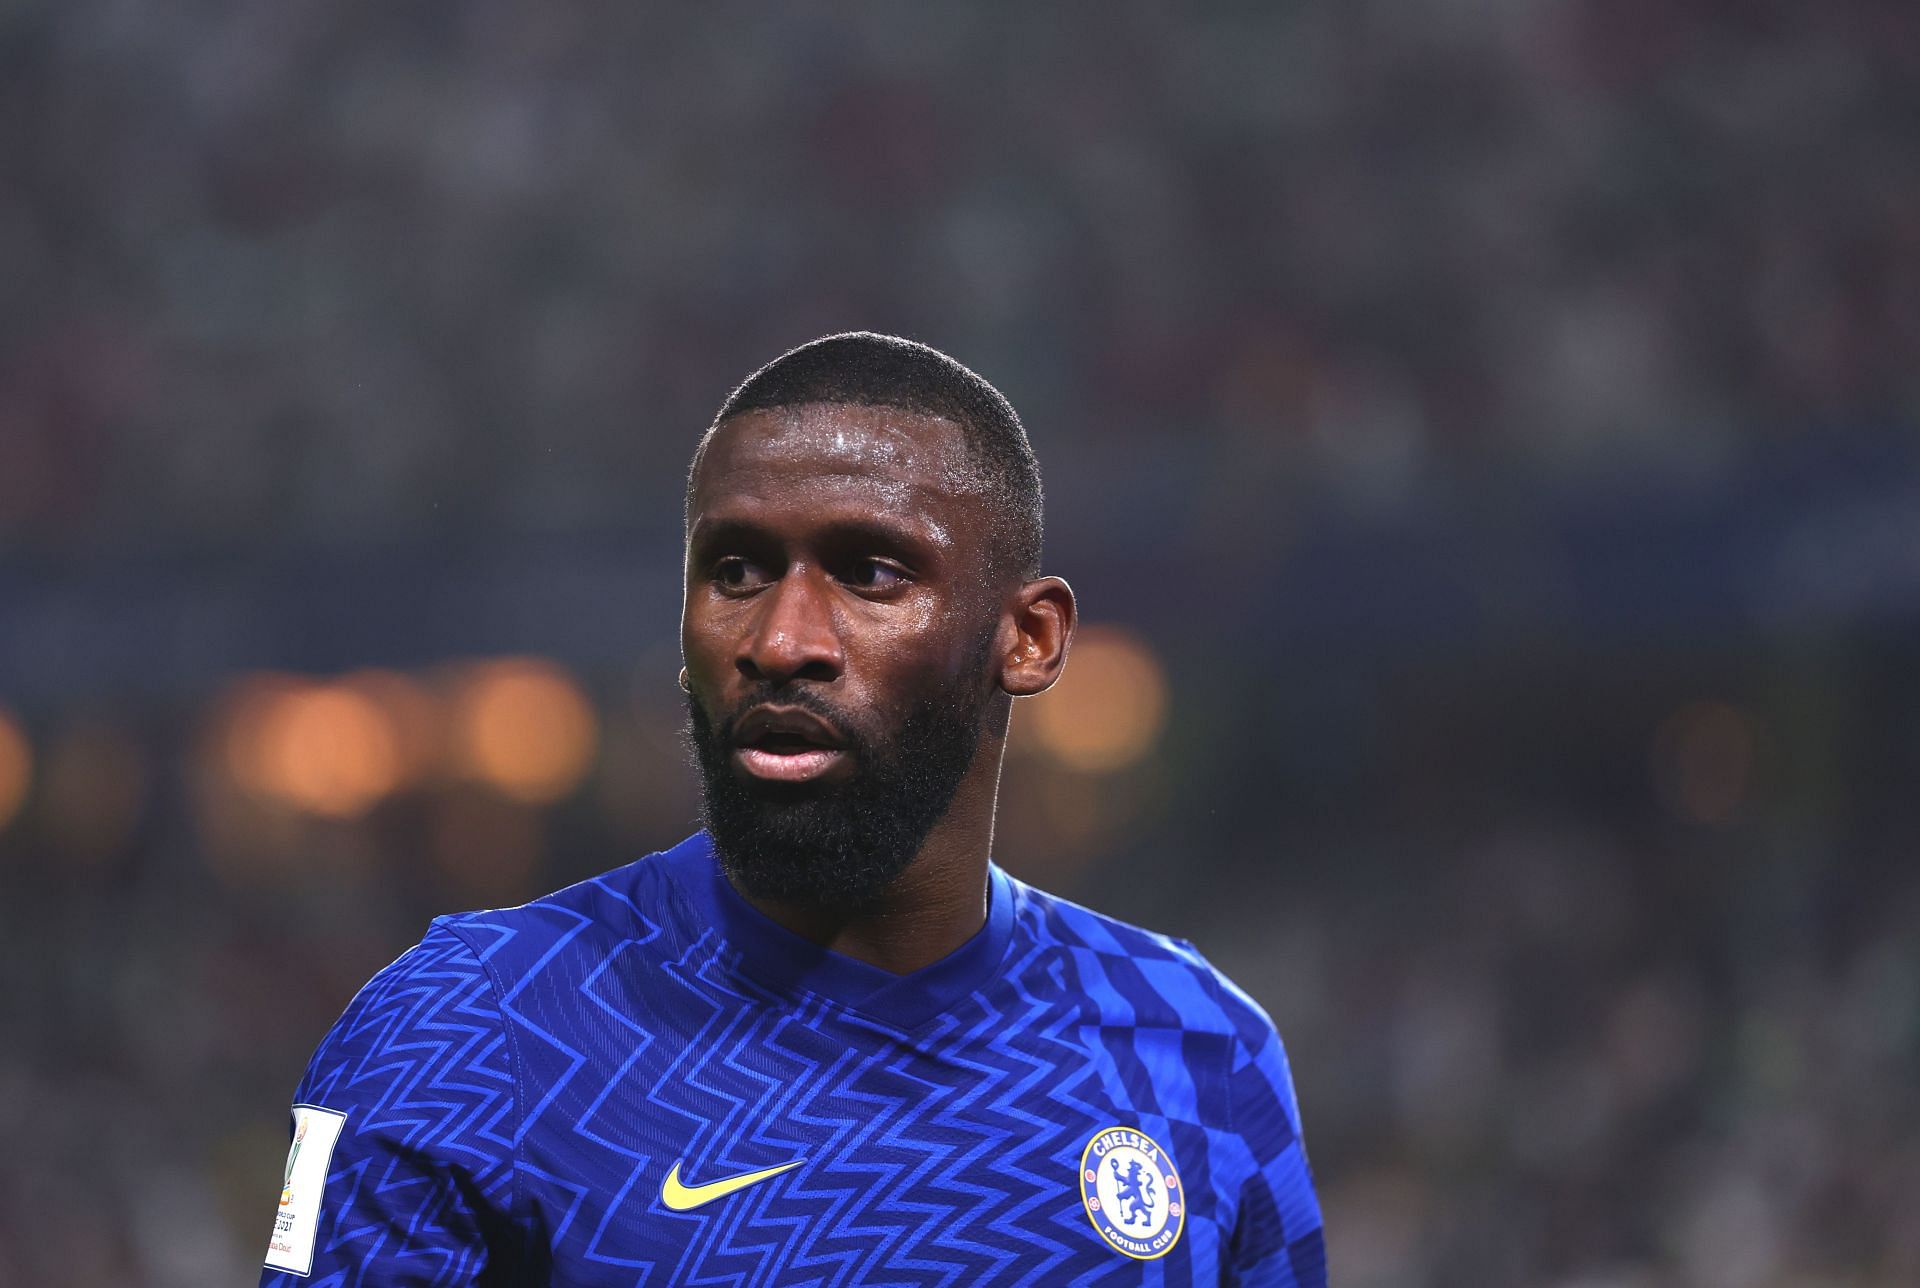 Rudiger wrote an open letter to Chelsea fans